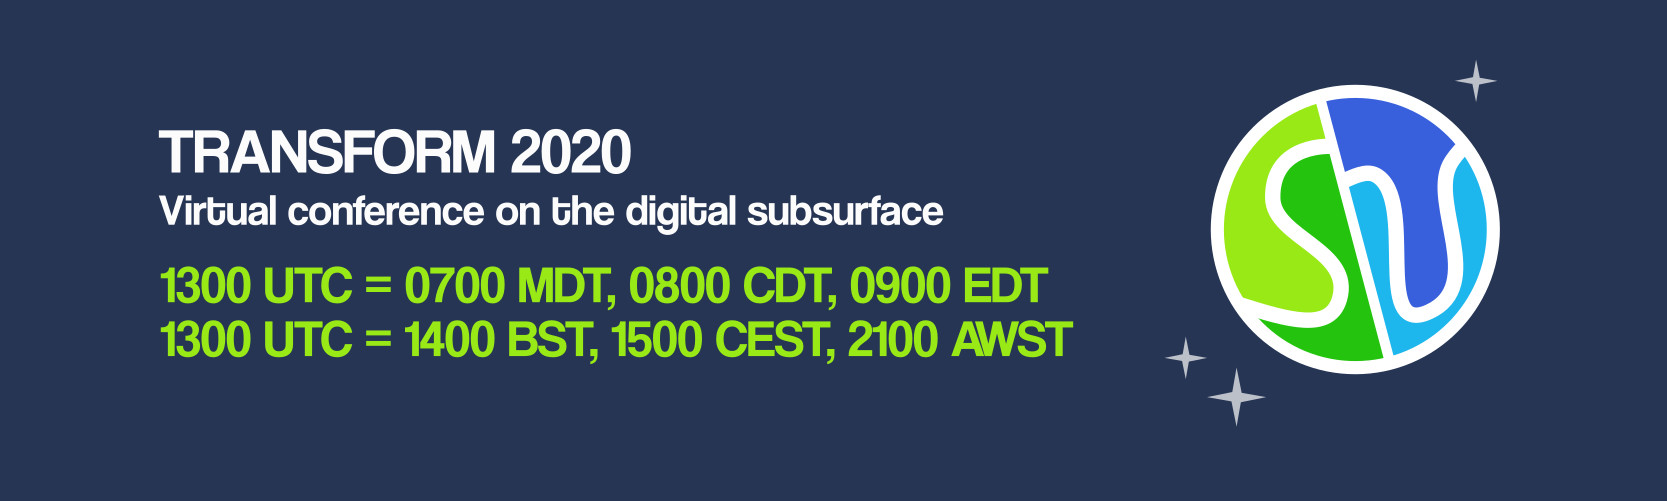 Transform2020 Virtual Conference on digital subsurface